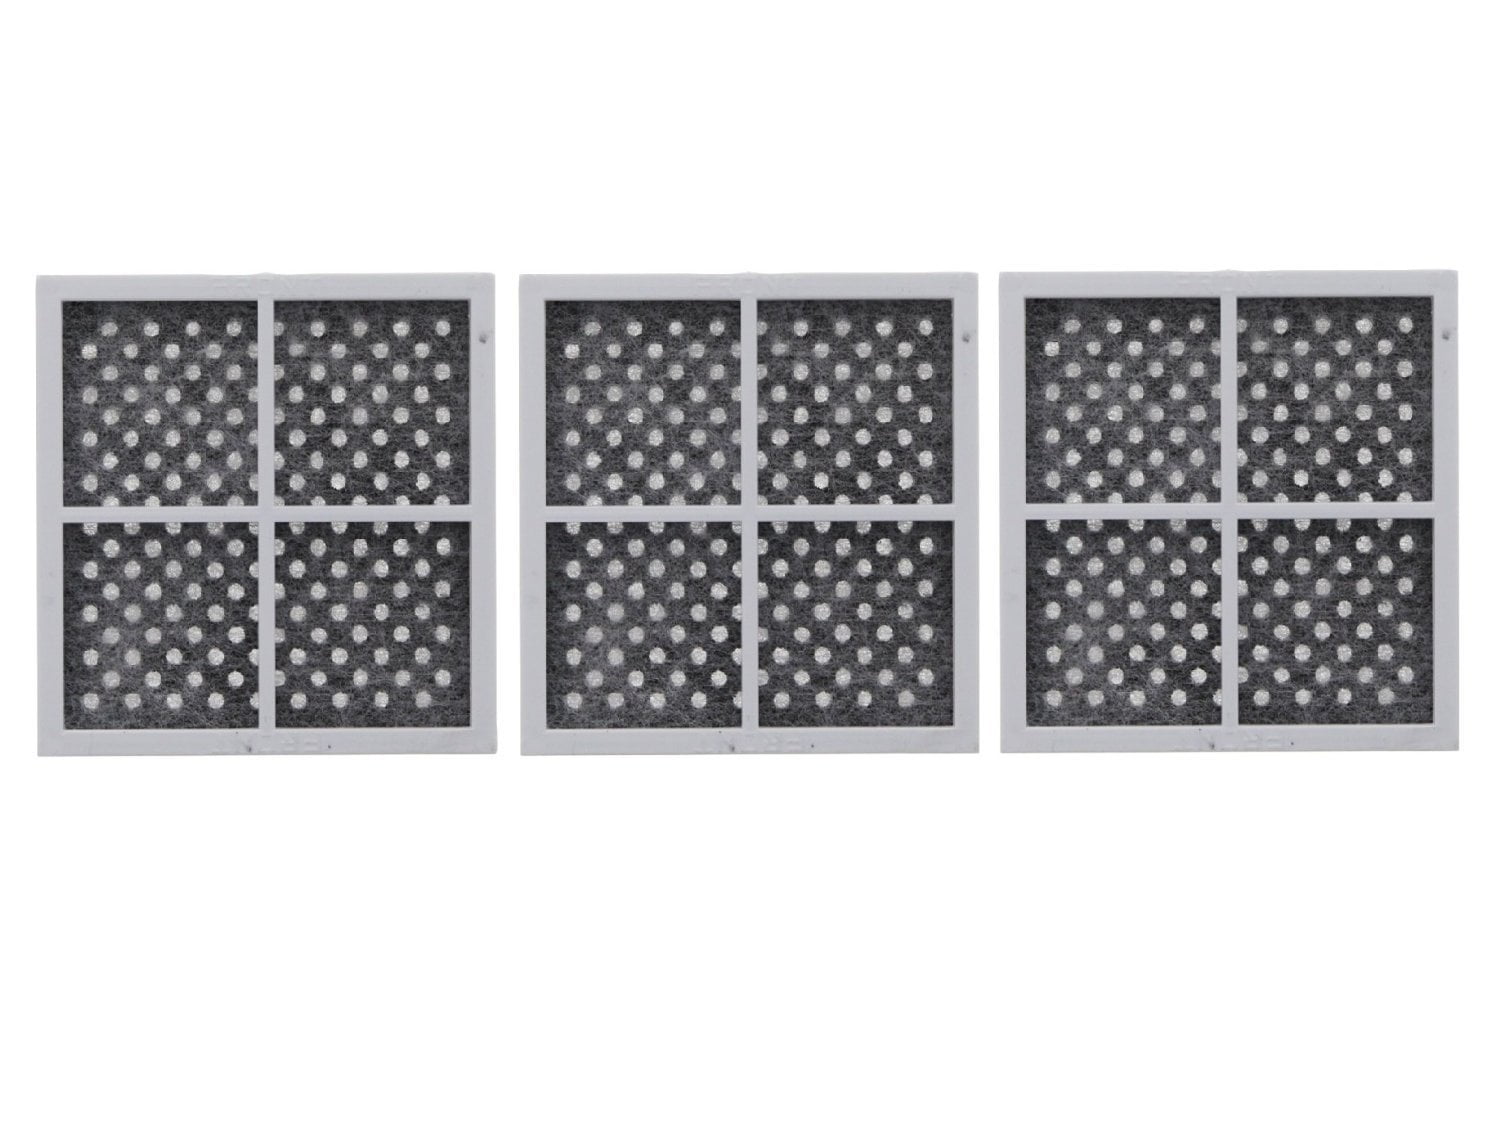 6 Replacements Fit LG Kenmore Fridge Filters Part # LT120F